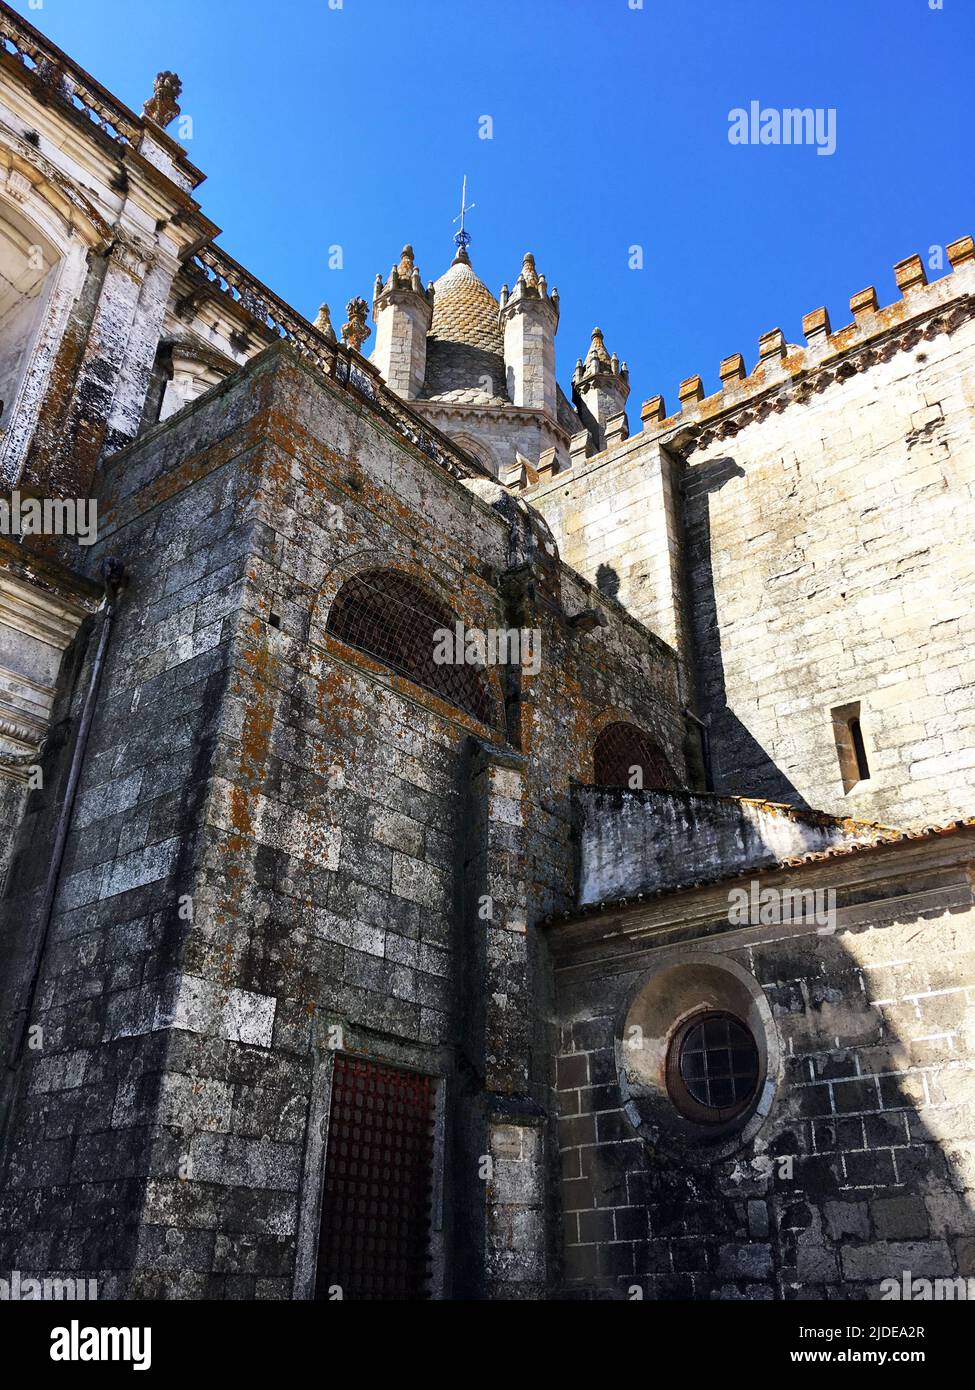 Lisbon, Portugal June 30, 2017: Lisbon's old city streets have not changed over time. Stock Photo